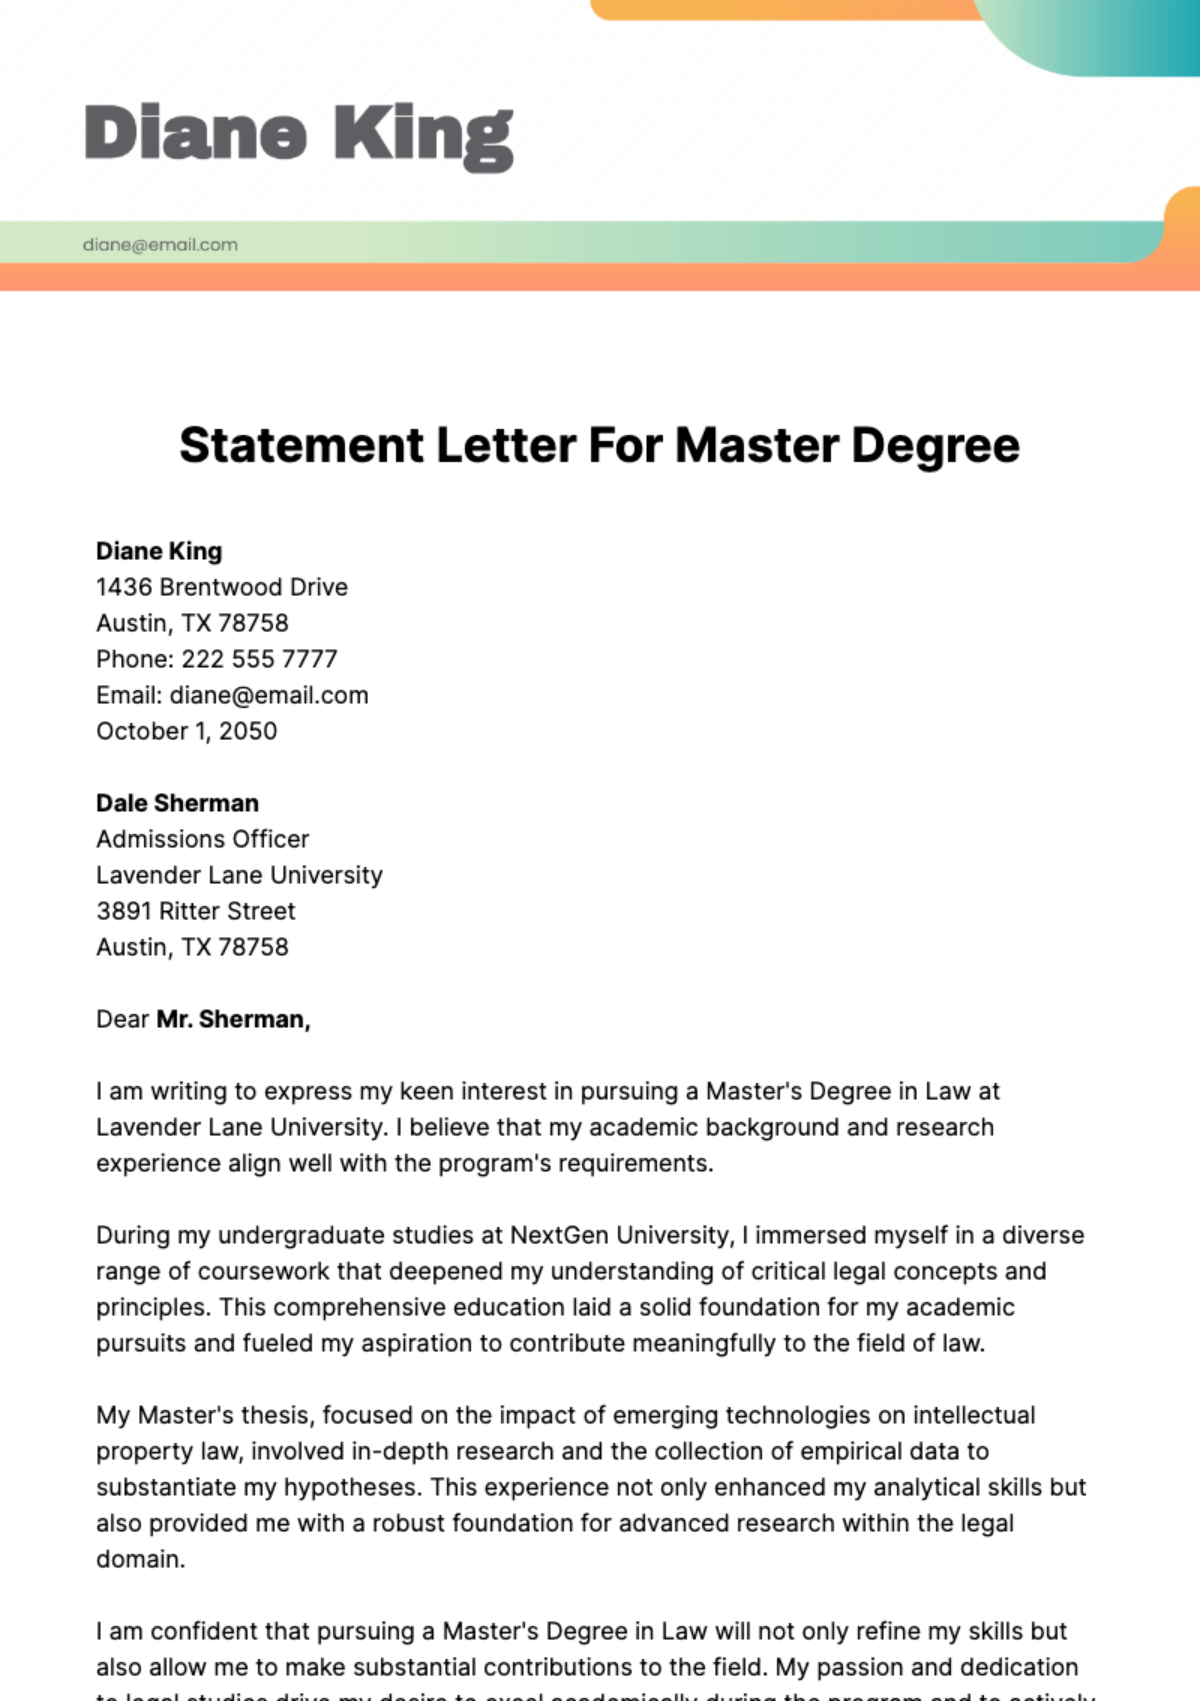 Free Statement Letter for Master Degree Template